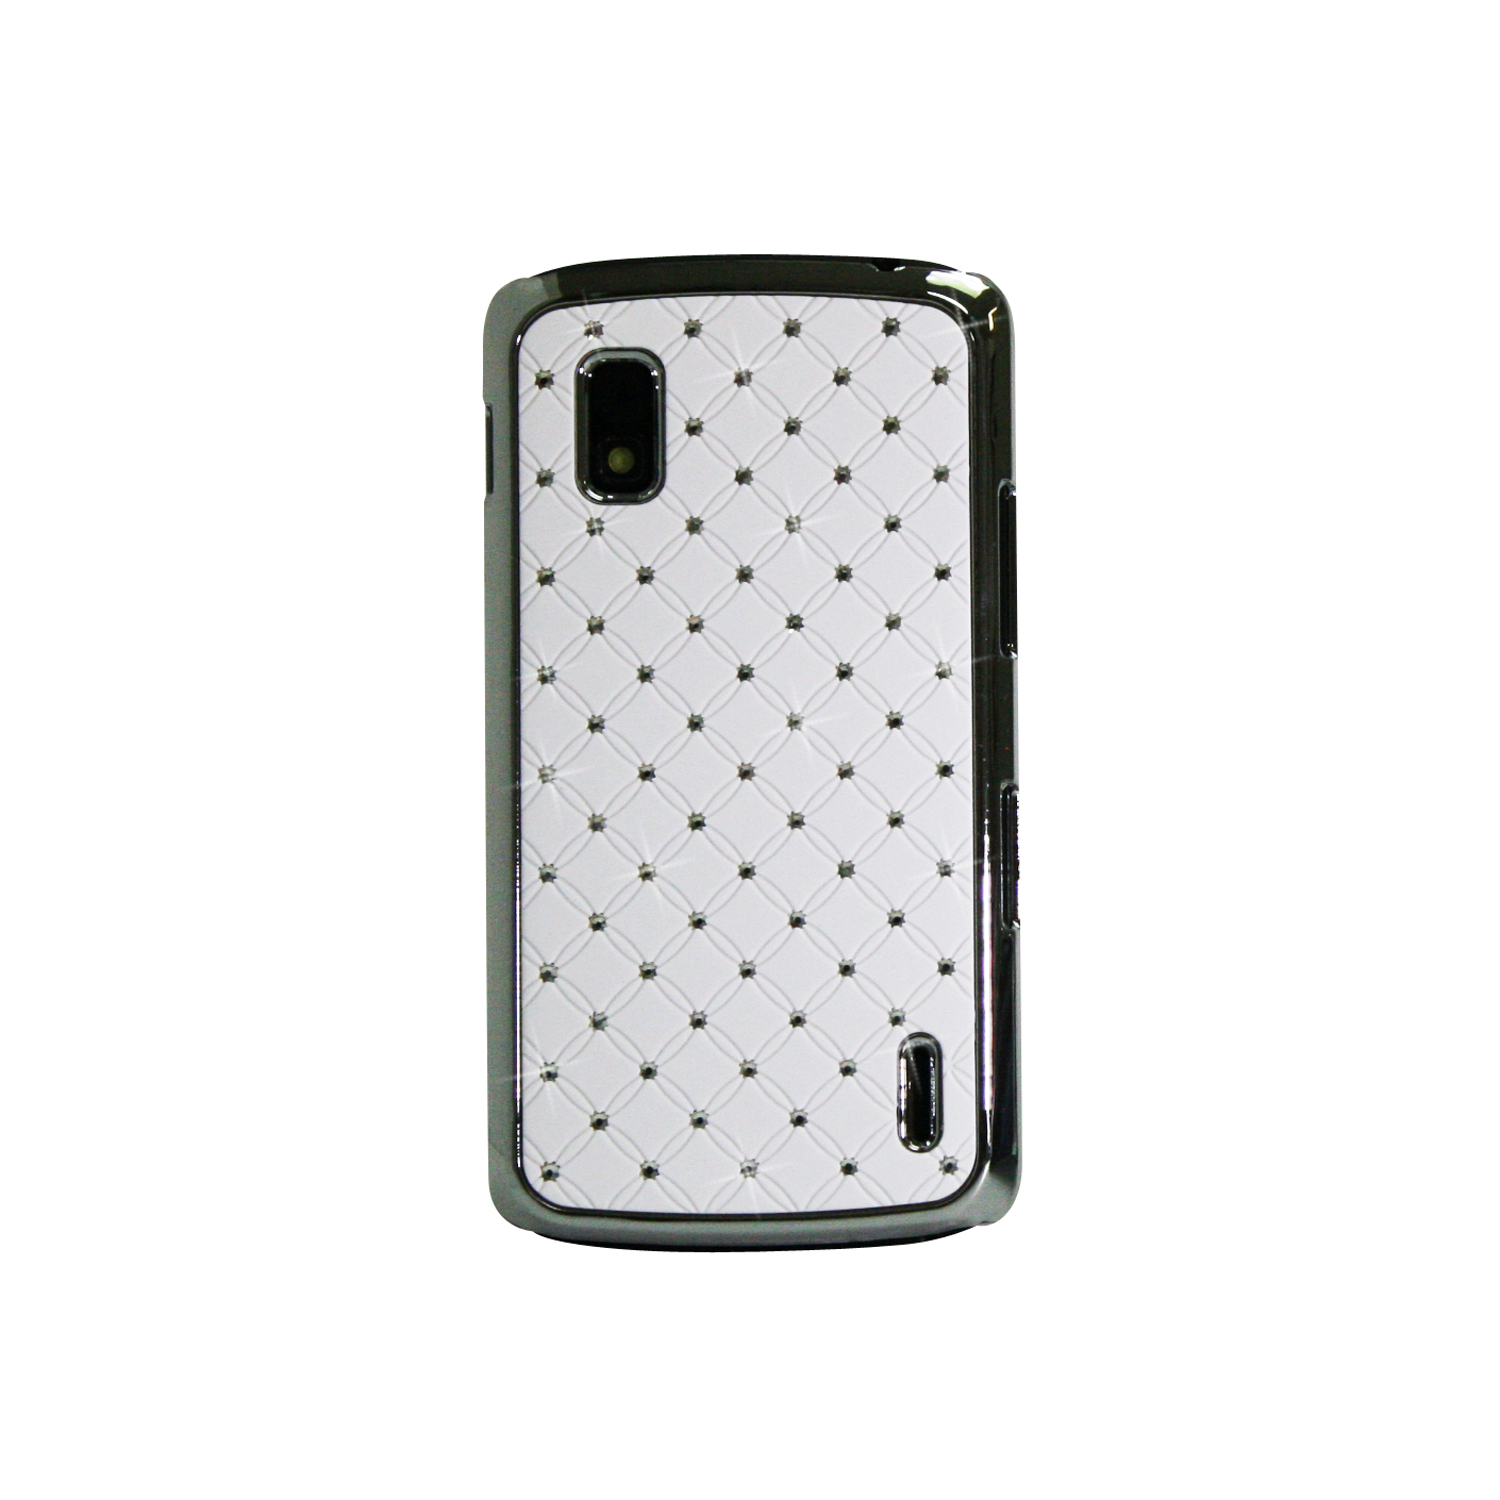 Exian Google LG Nexus 4 Hard Plastic Case silver Plated Embedded Crystals White